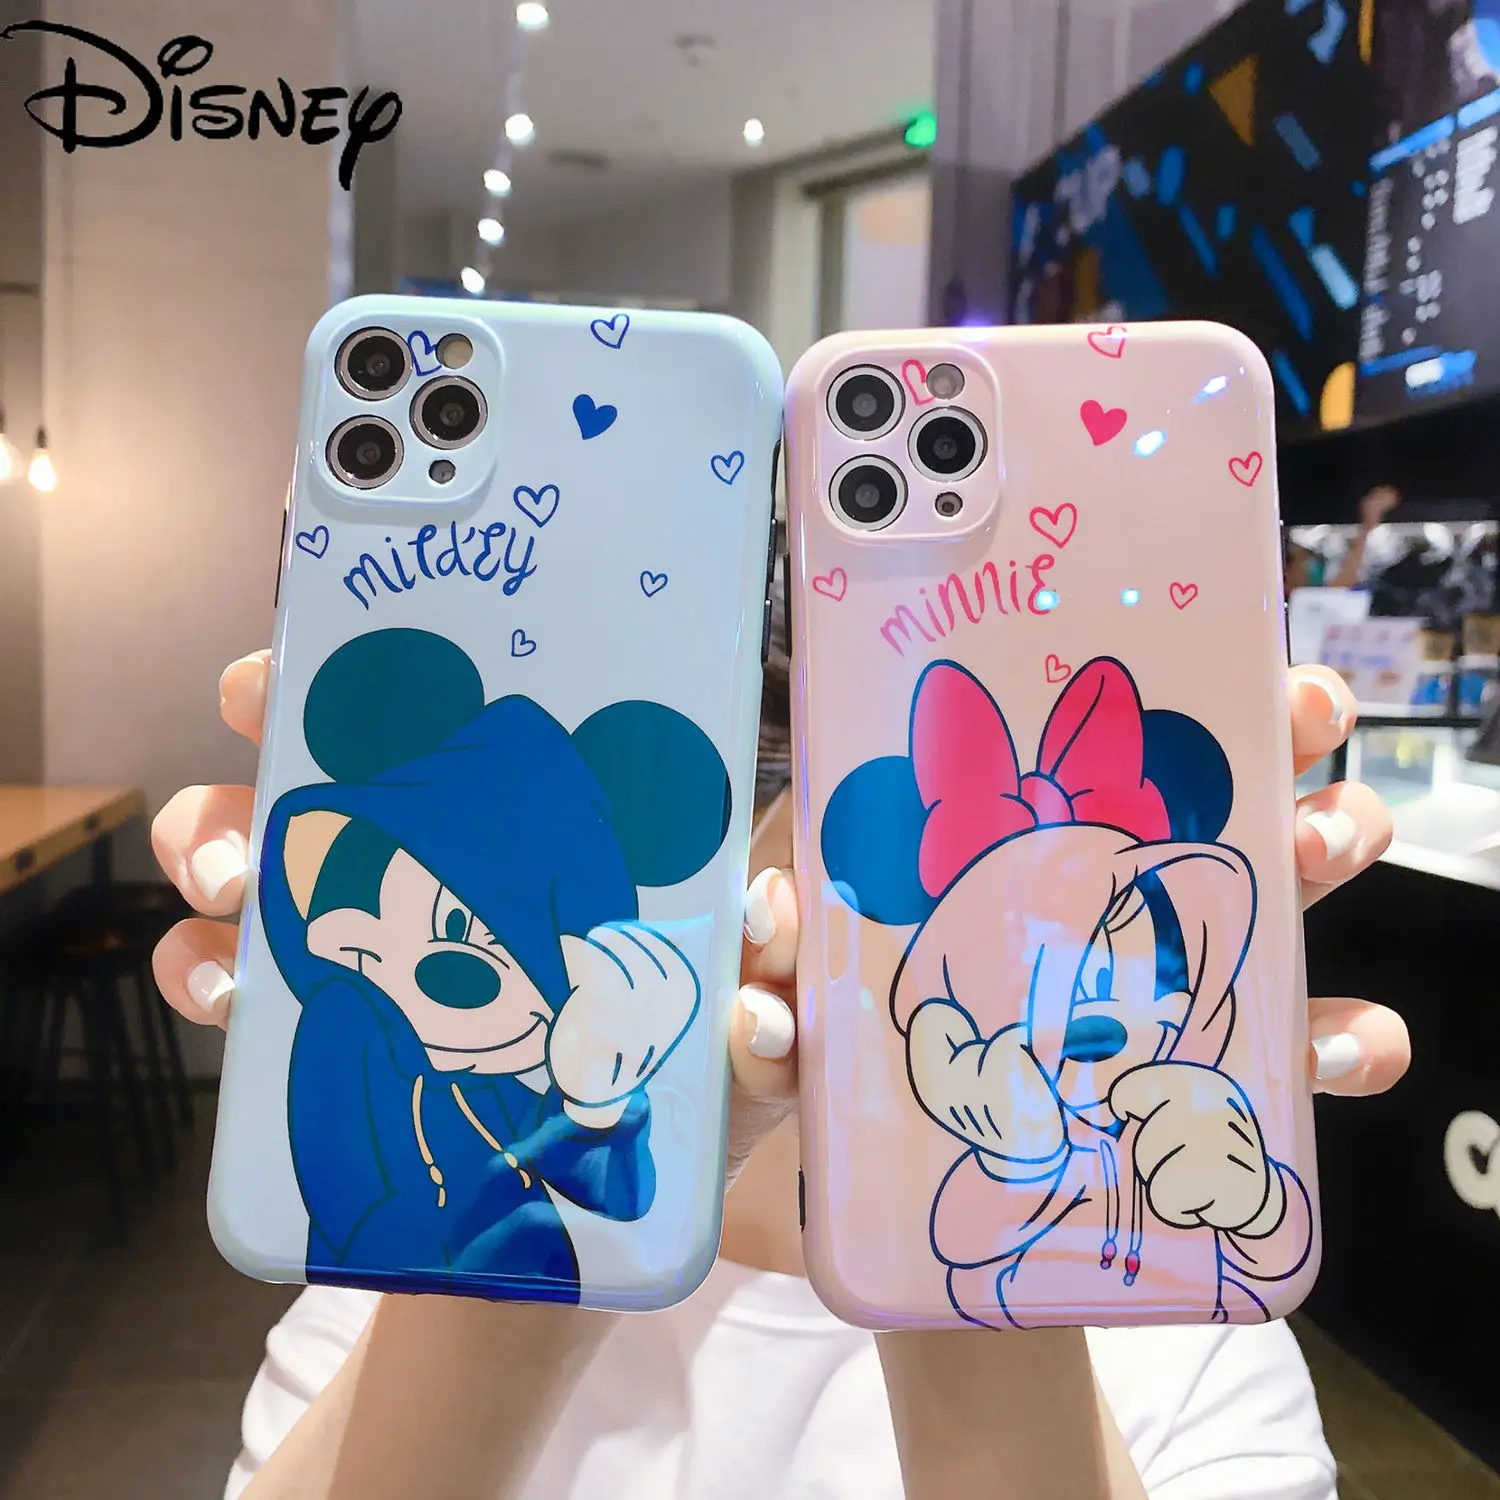 

Disney Mickey Case for Iphone 11 12 13 Pro Max 11pro 11promax 12pro 12promax 13pro 13promxa XS MAX 7 8Plus Cartoon Blu Ray Cover